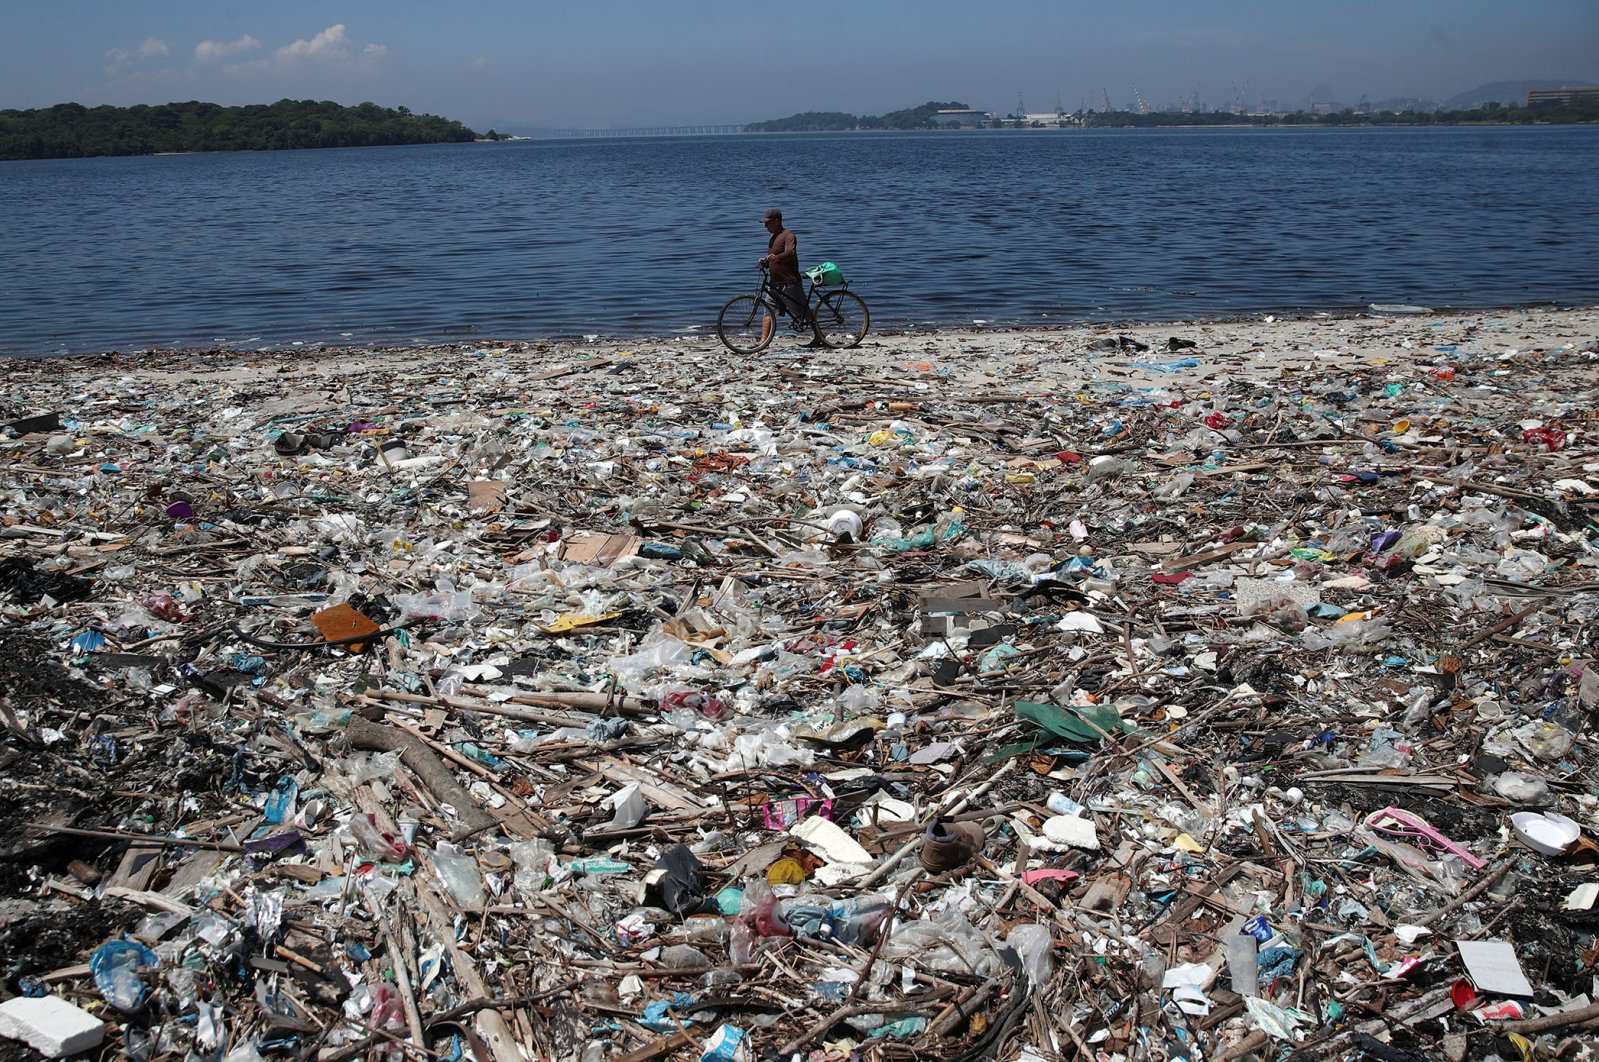 A man walks by garbage at a polluted beach on the banks of Guanabara Bay in Rio de Janeiro, Brazil, March 16, 2022. (Reuters Photo)